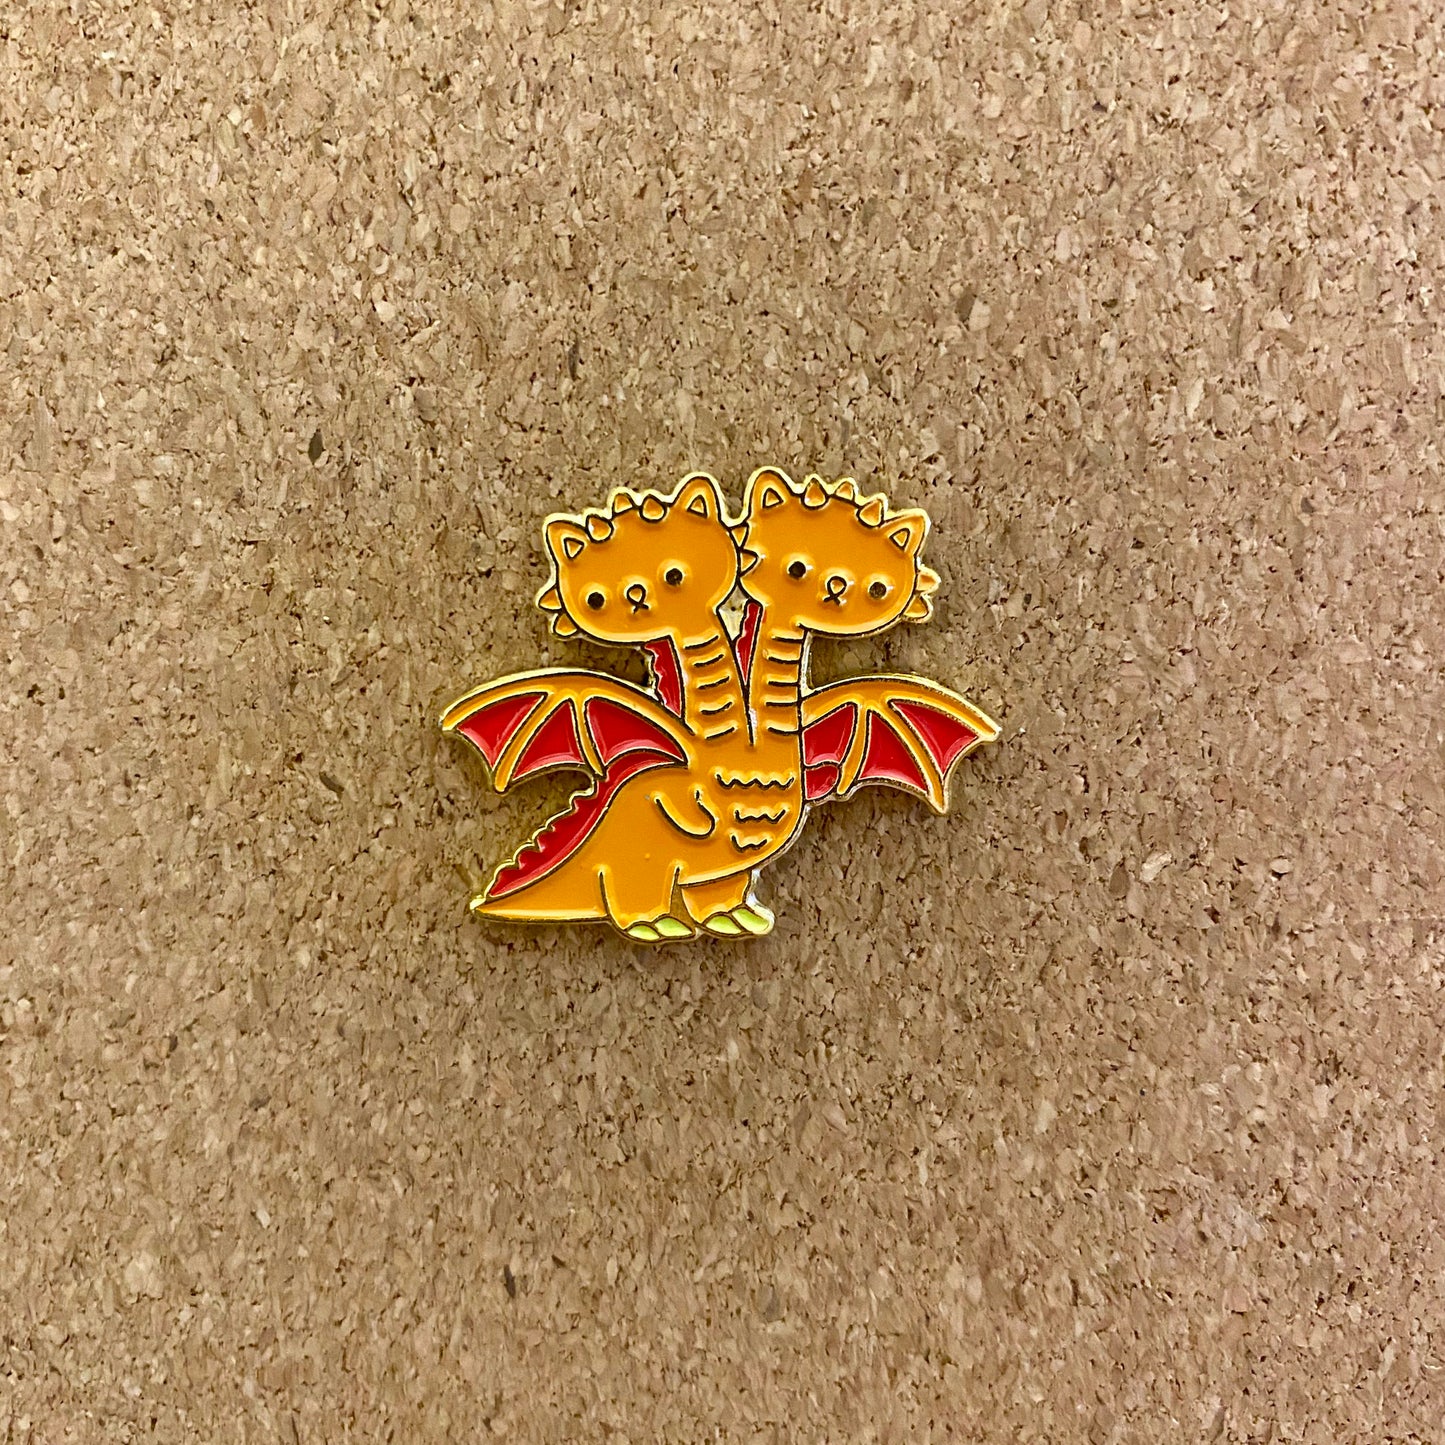 Fire and Ball the Two Headed Dragon Enamel Pin - thehappypin